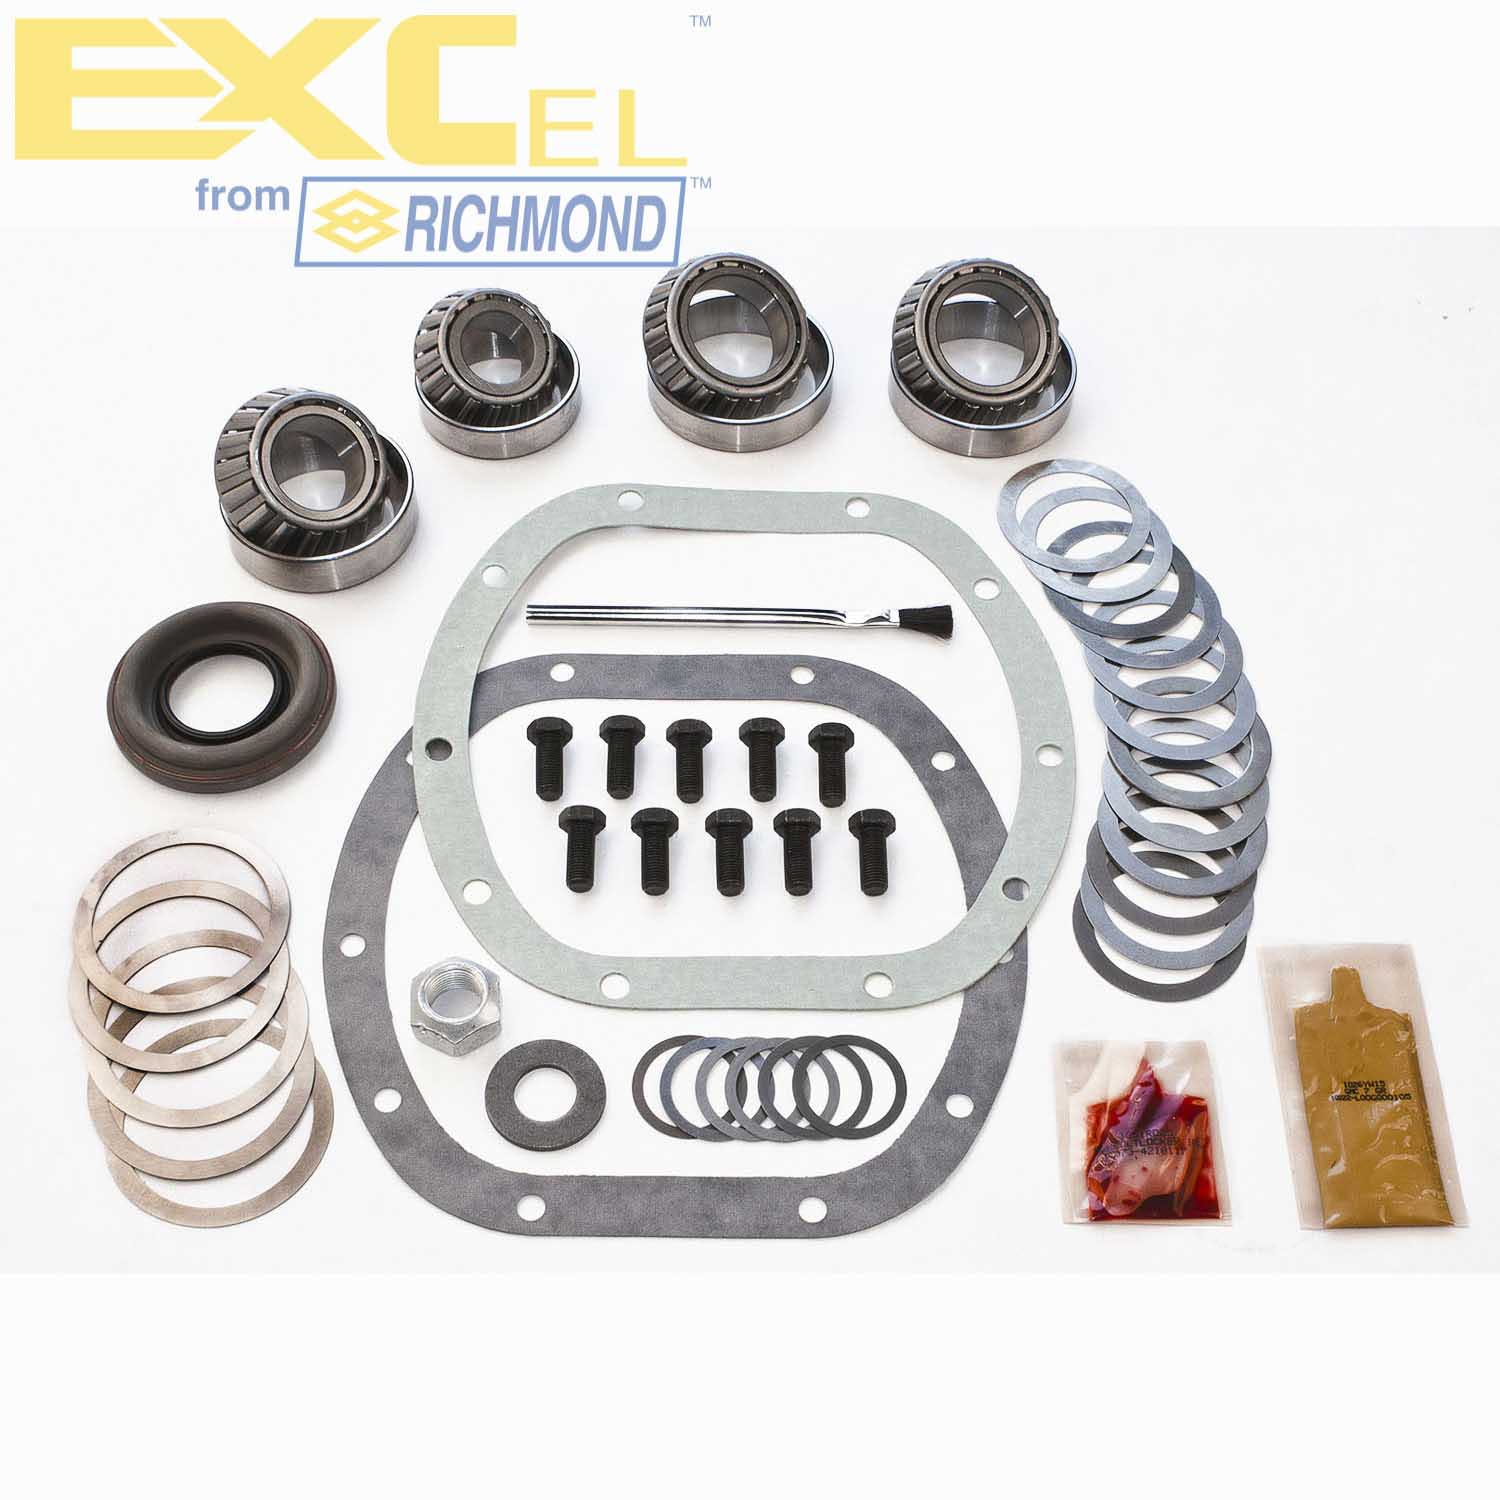 Excel XL-1058-1 Differential Bearing Kit